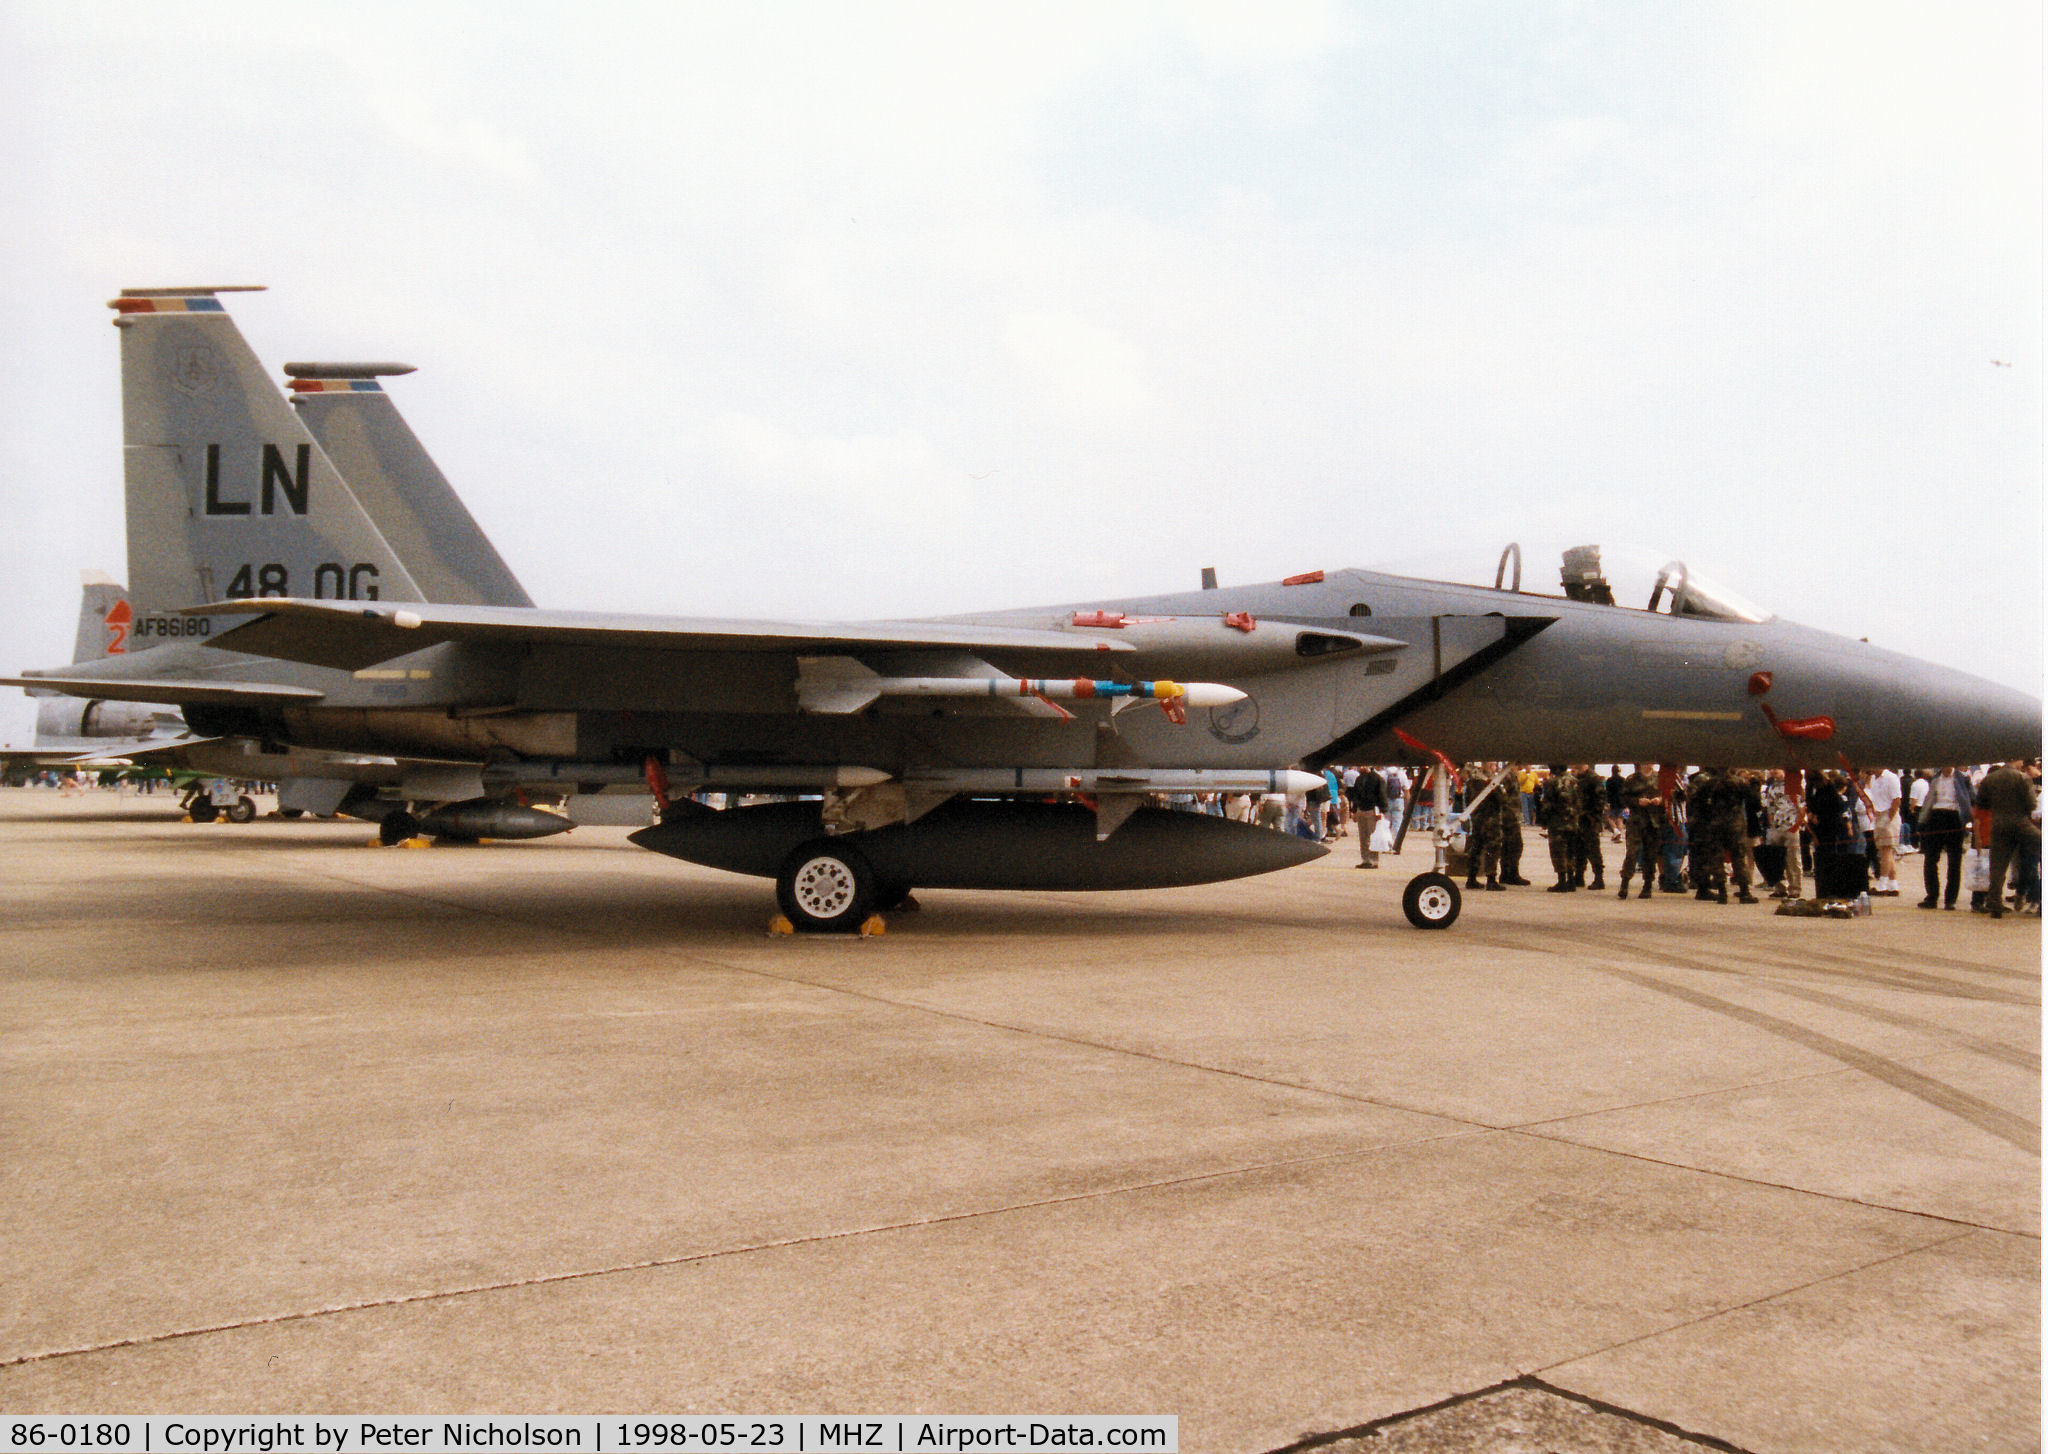 86-0180, 1986 McDonnell Douglas F-15C Eagle C/N 1033/C408, F-15C Eagle of the 48th Fighter Wing at RAF Lakenheath with special markings for the 48th Operations Group Commanding Officer on display at the 1998 RAF Mildenhall Air Fete.